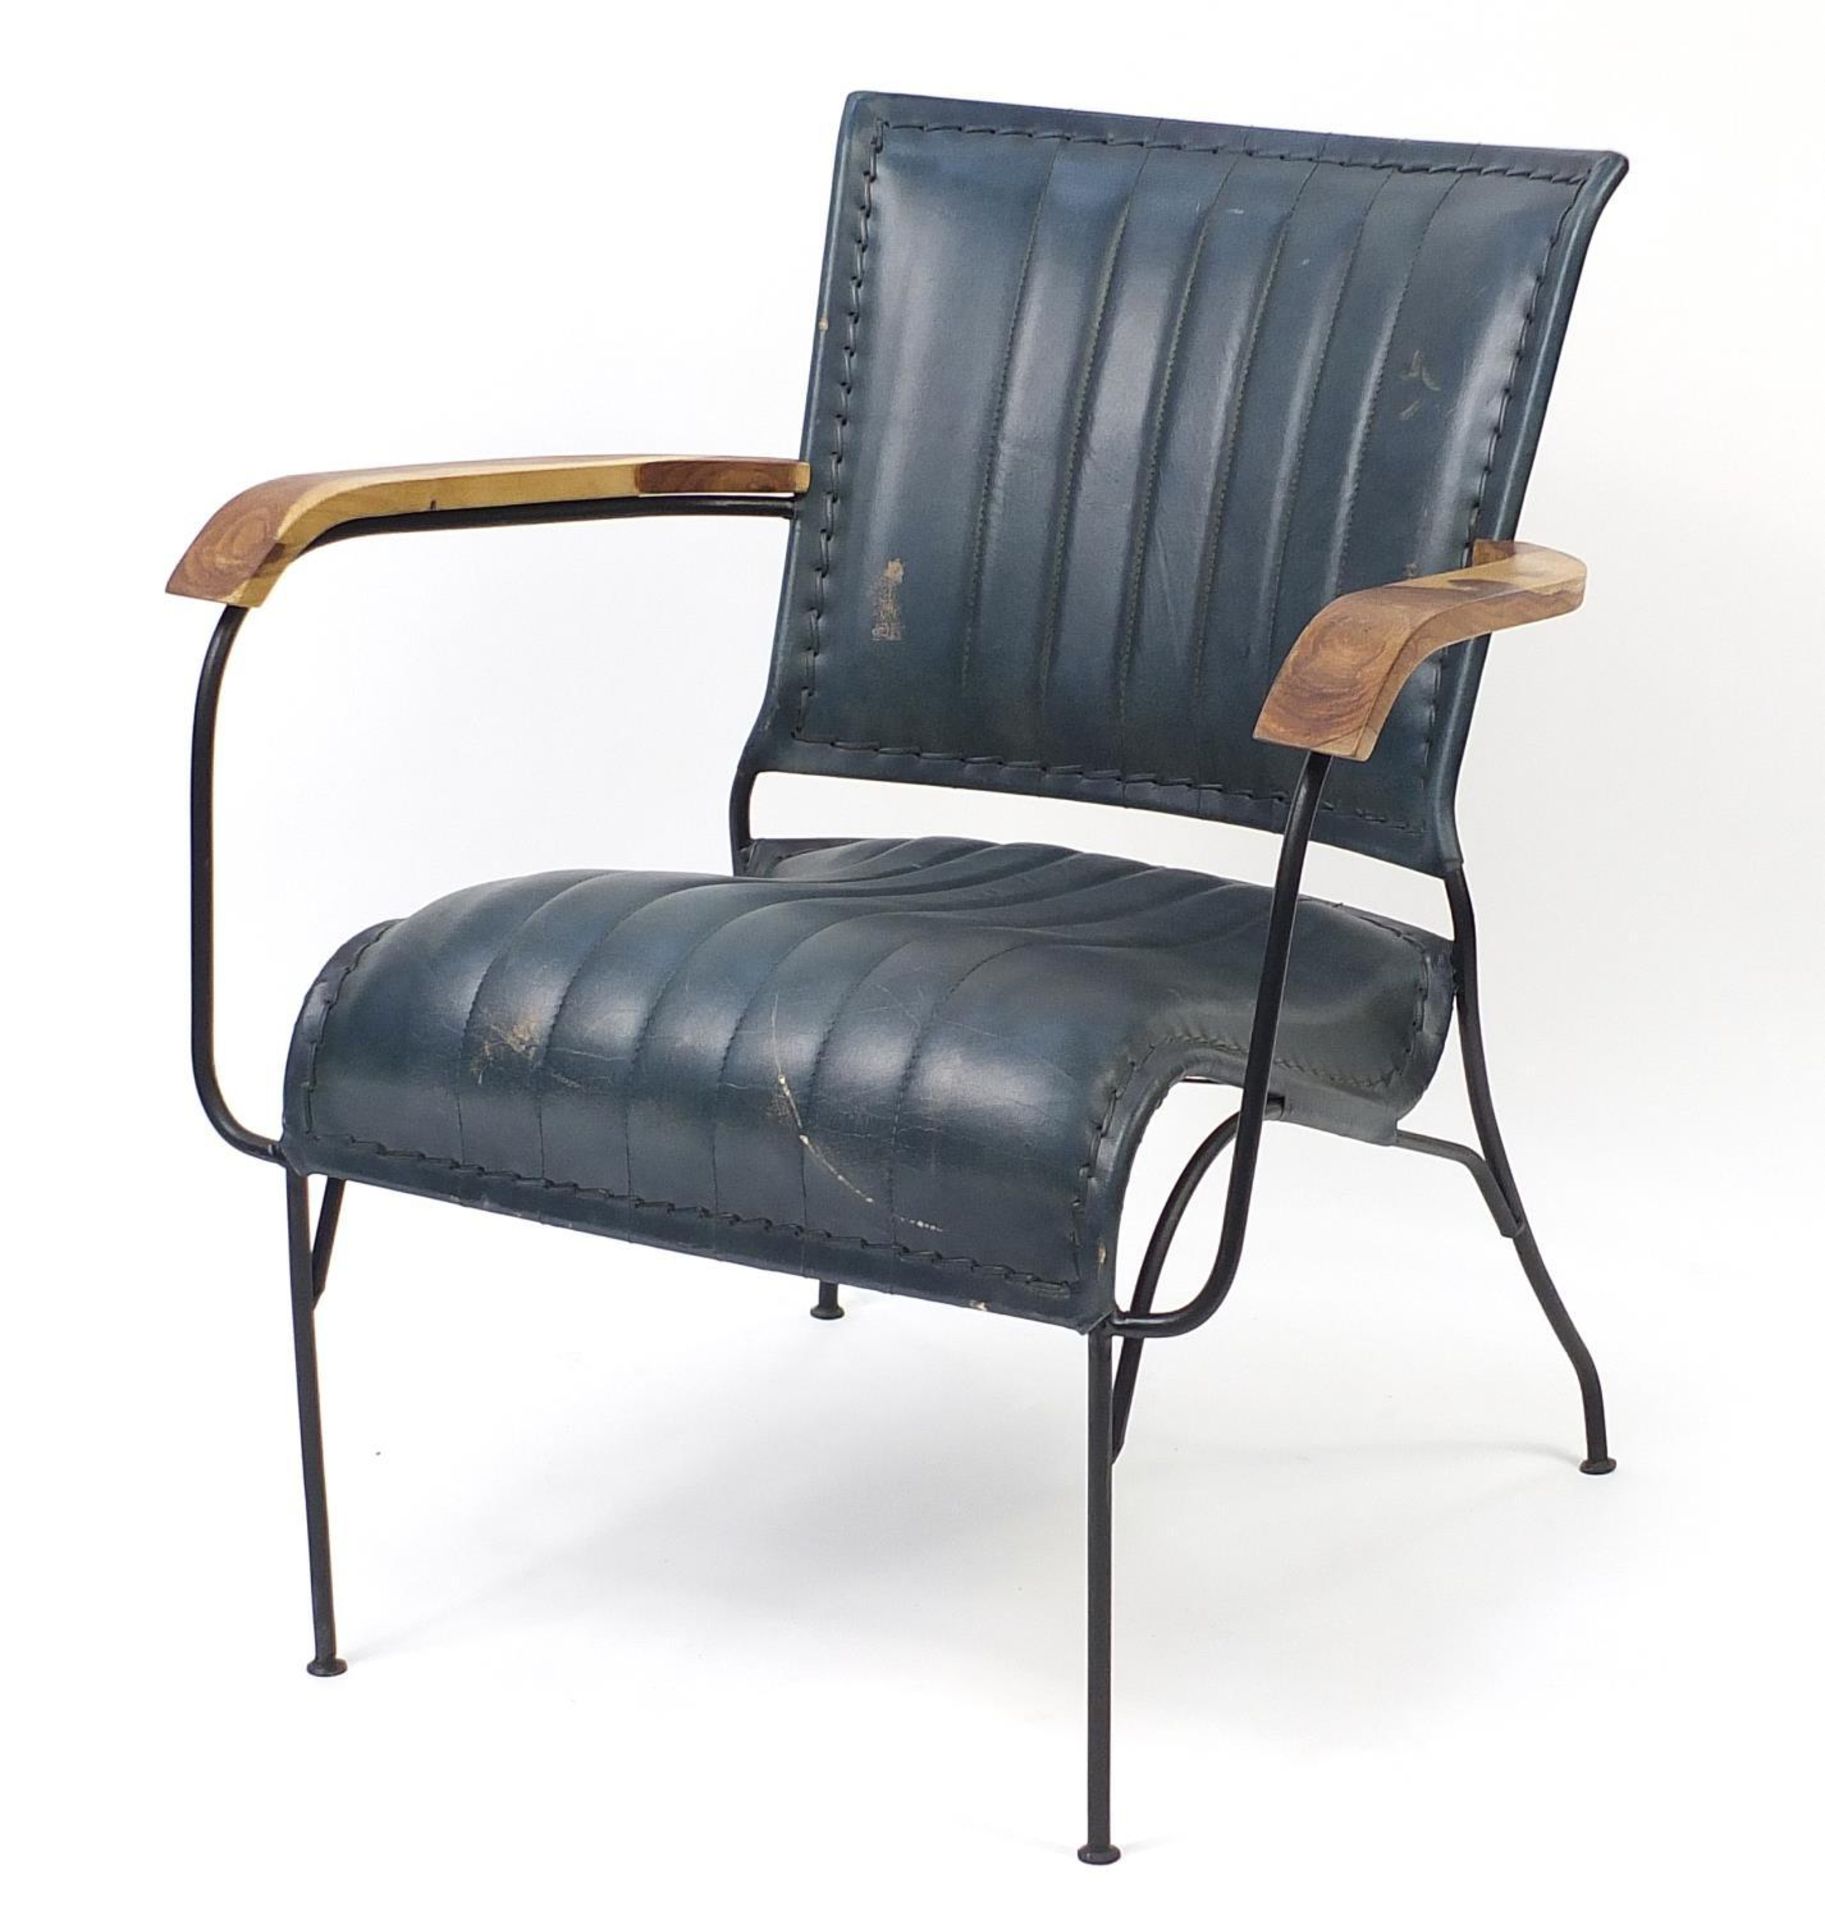 Industrial hardwood and leather design elbow chair, 75cm high :